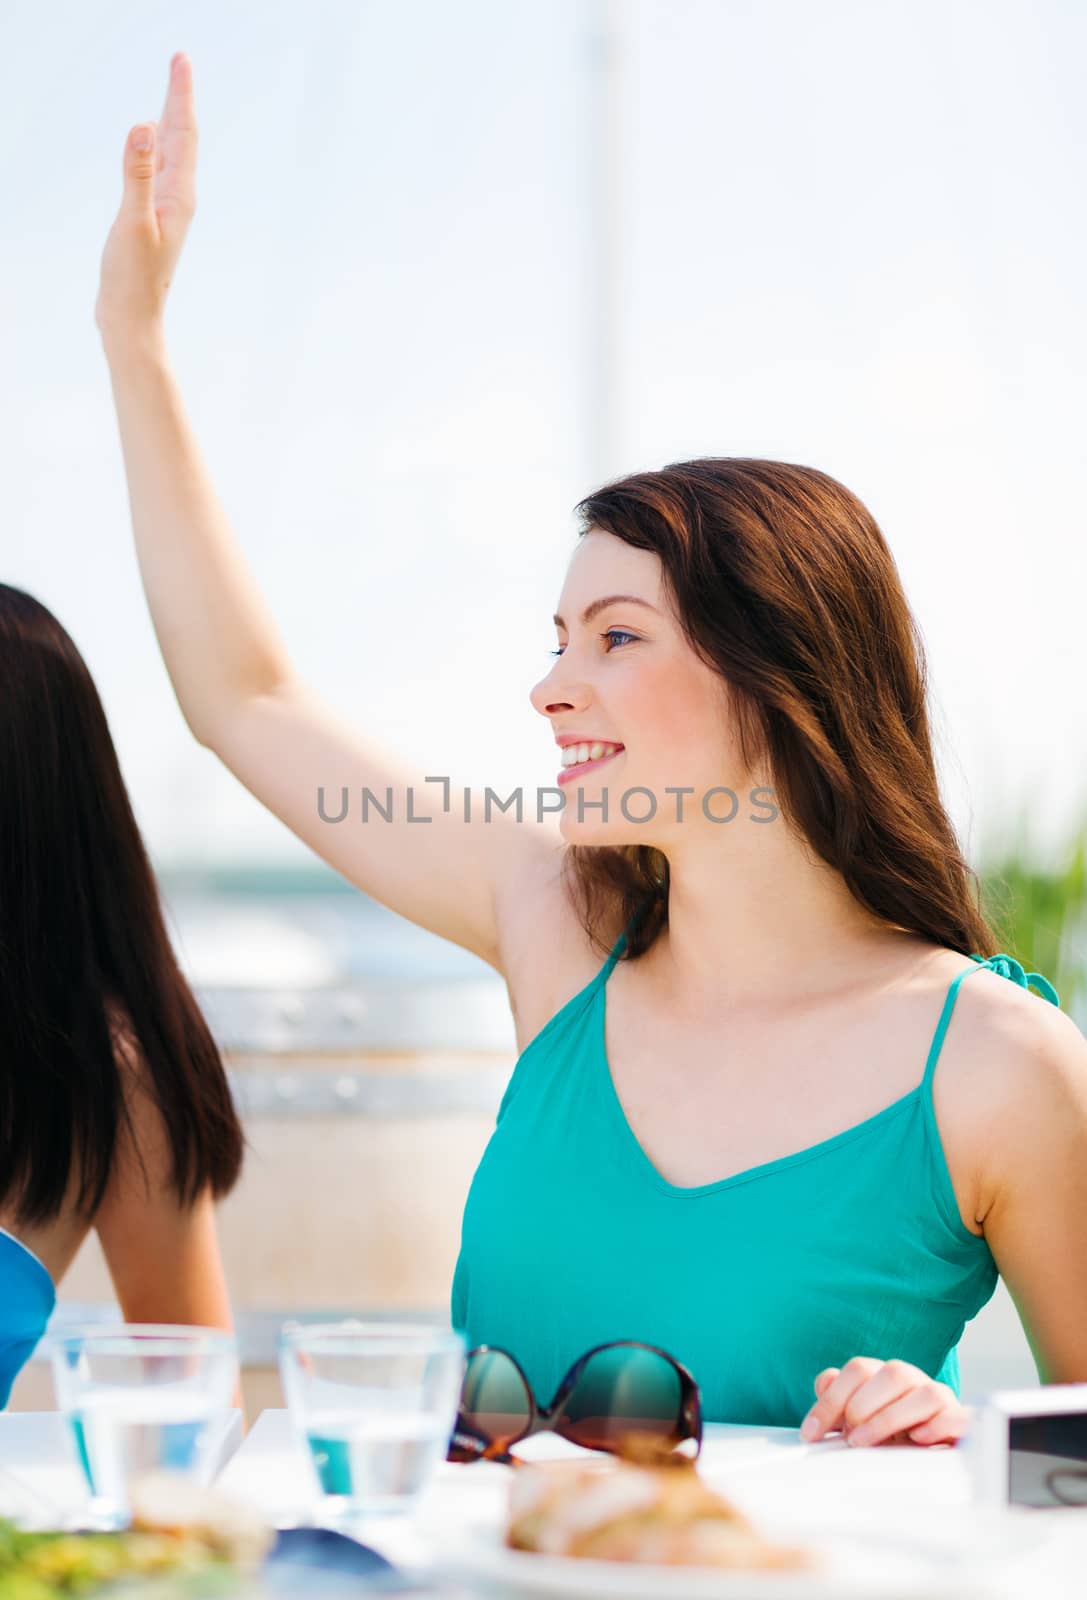 summer holidays and vacation - girl waving hand in cafe on the beach